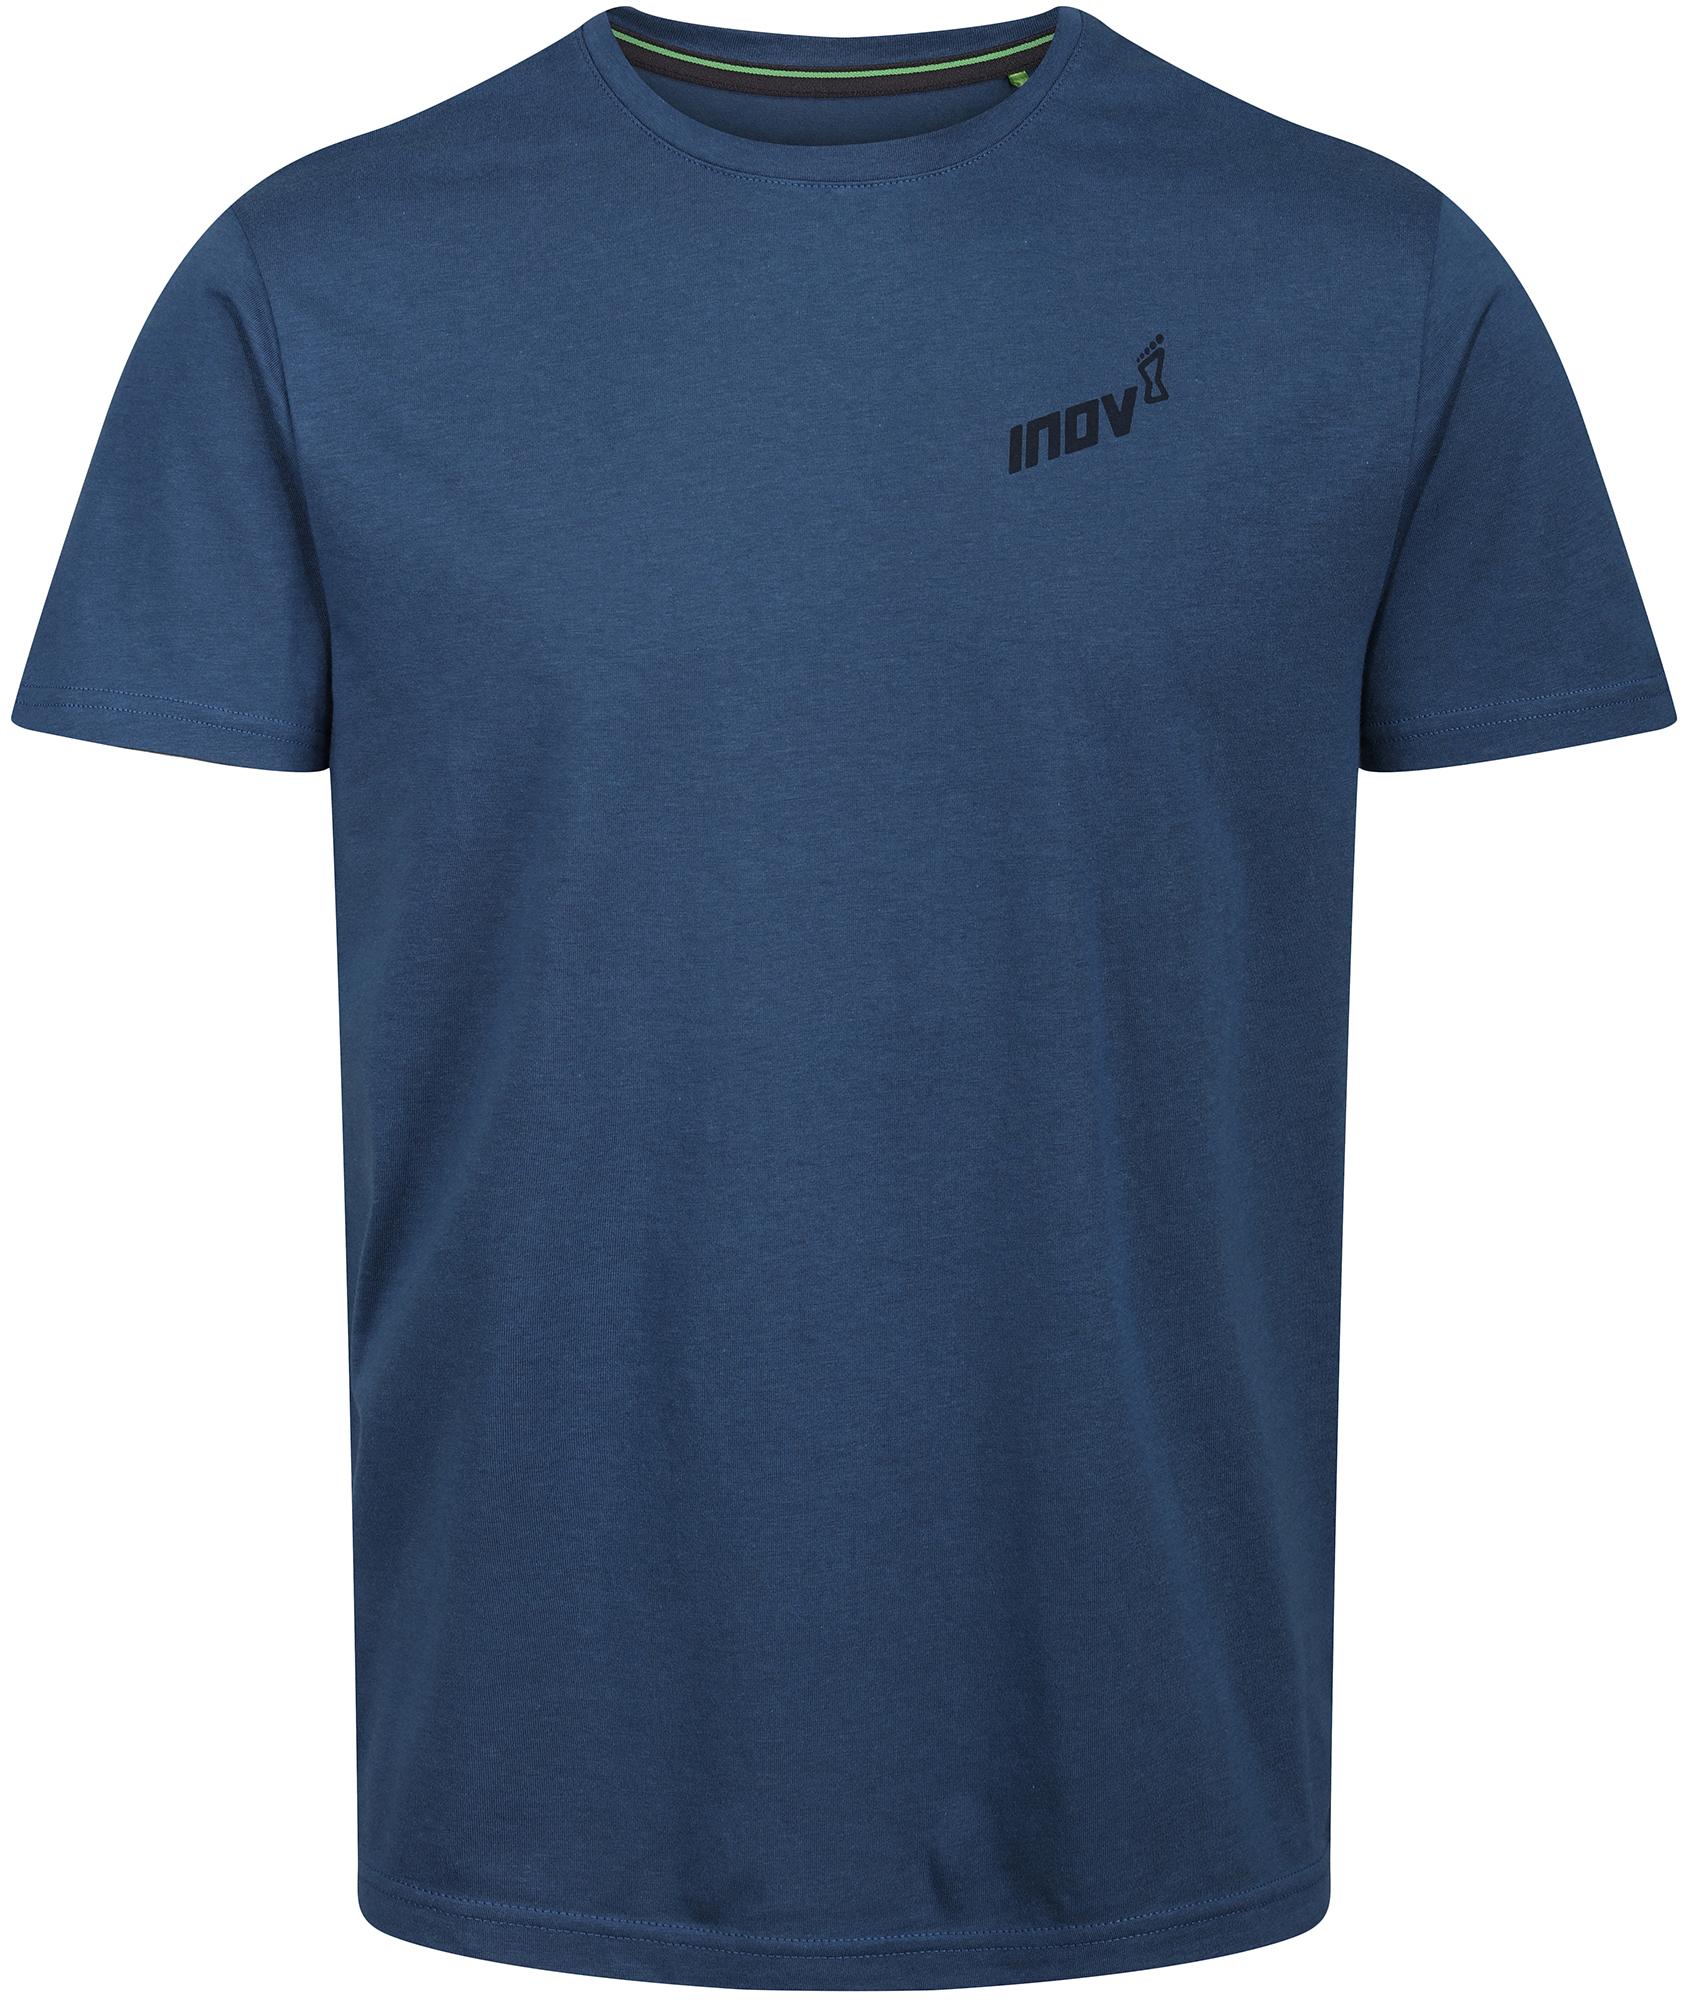 Inov-8 Forged Graphic Short Sleeve Tee - Navy